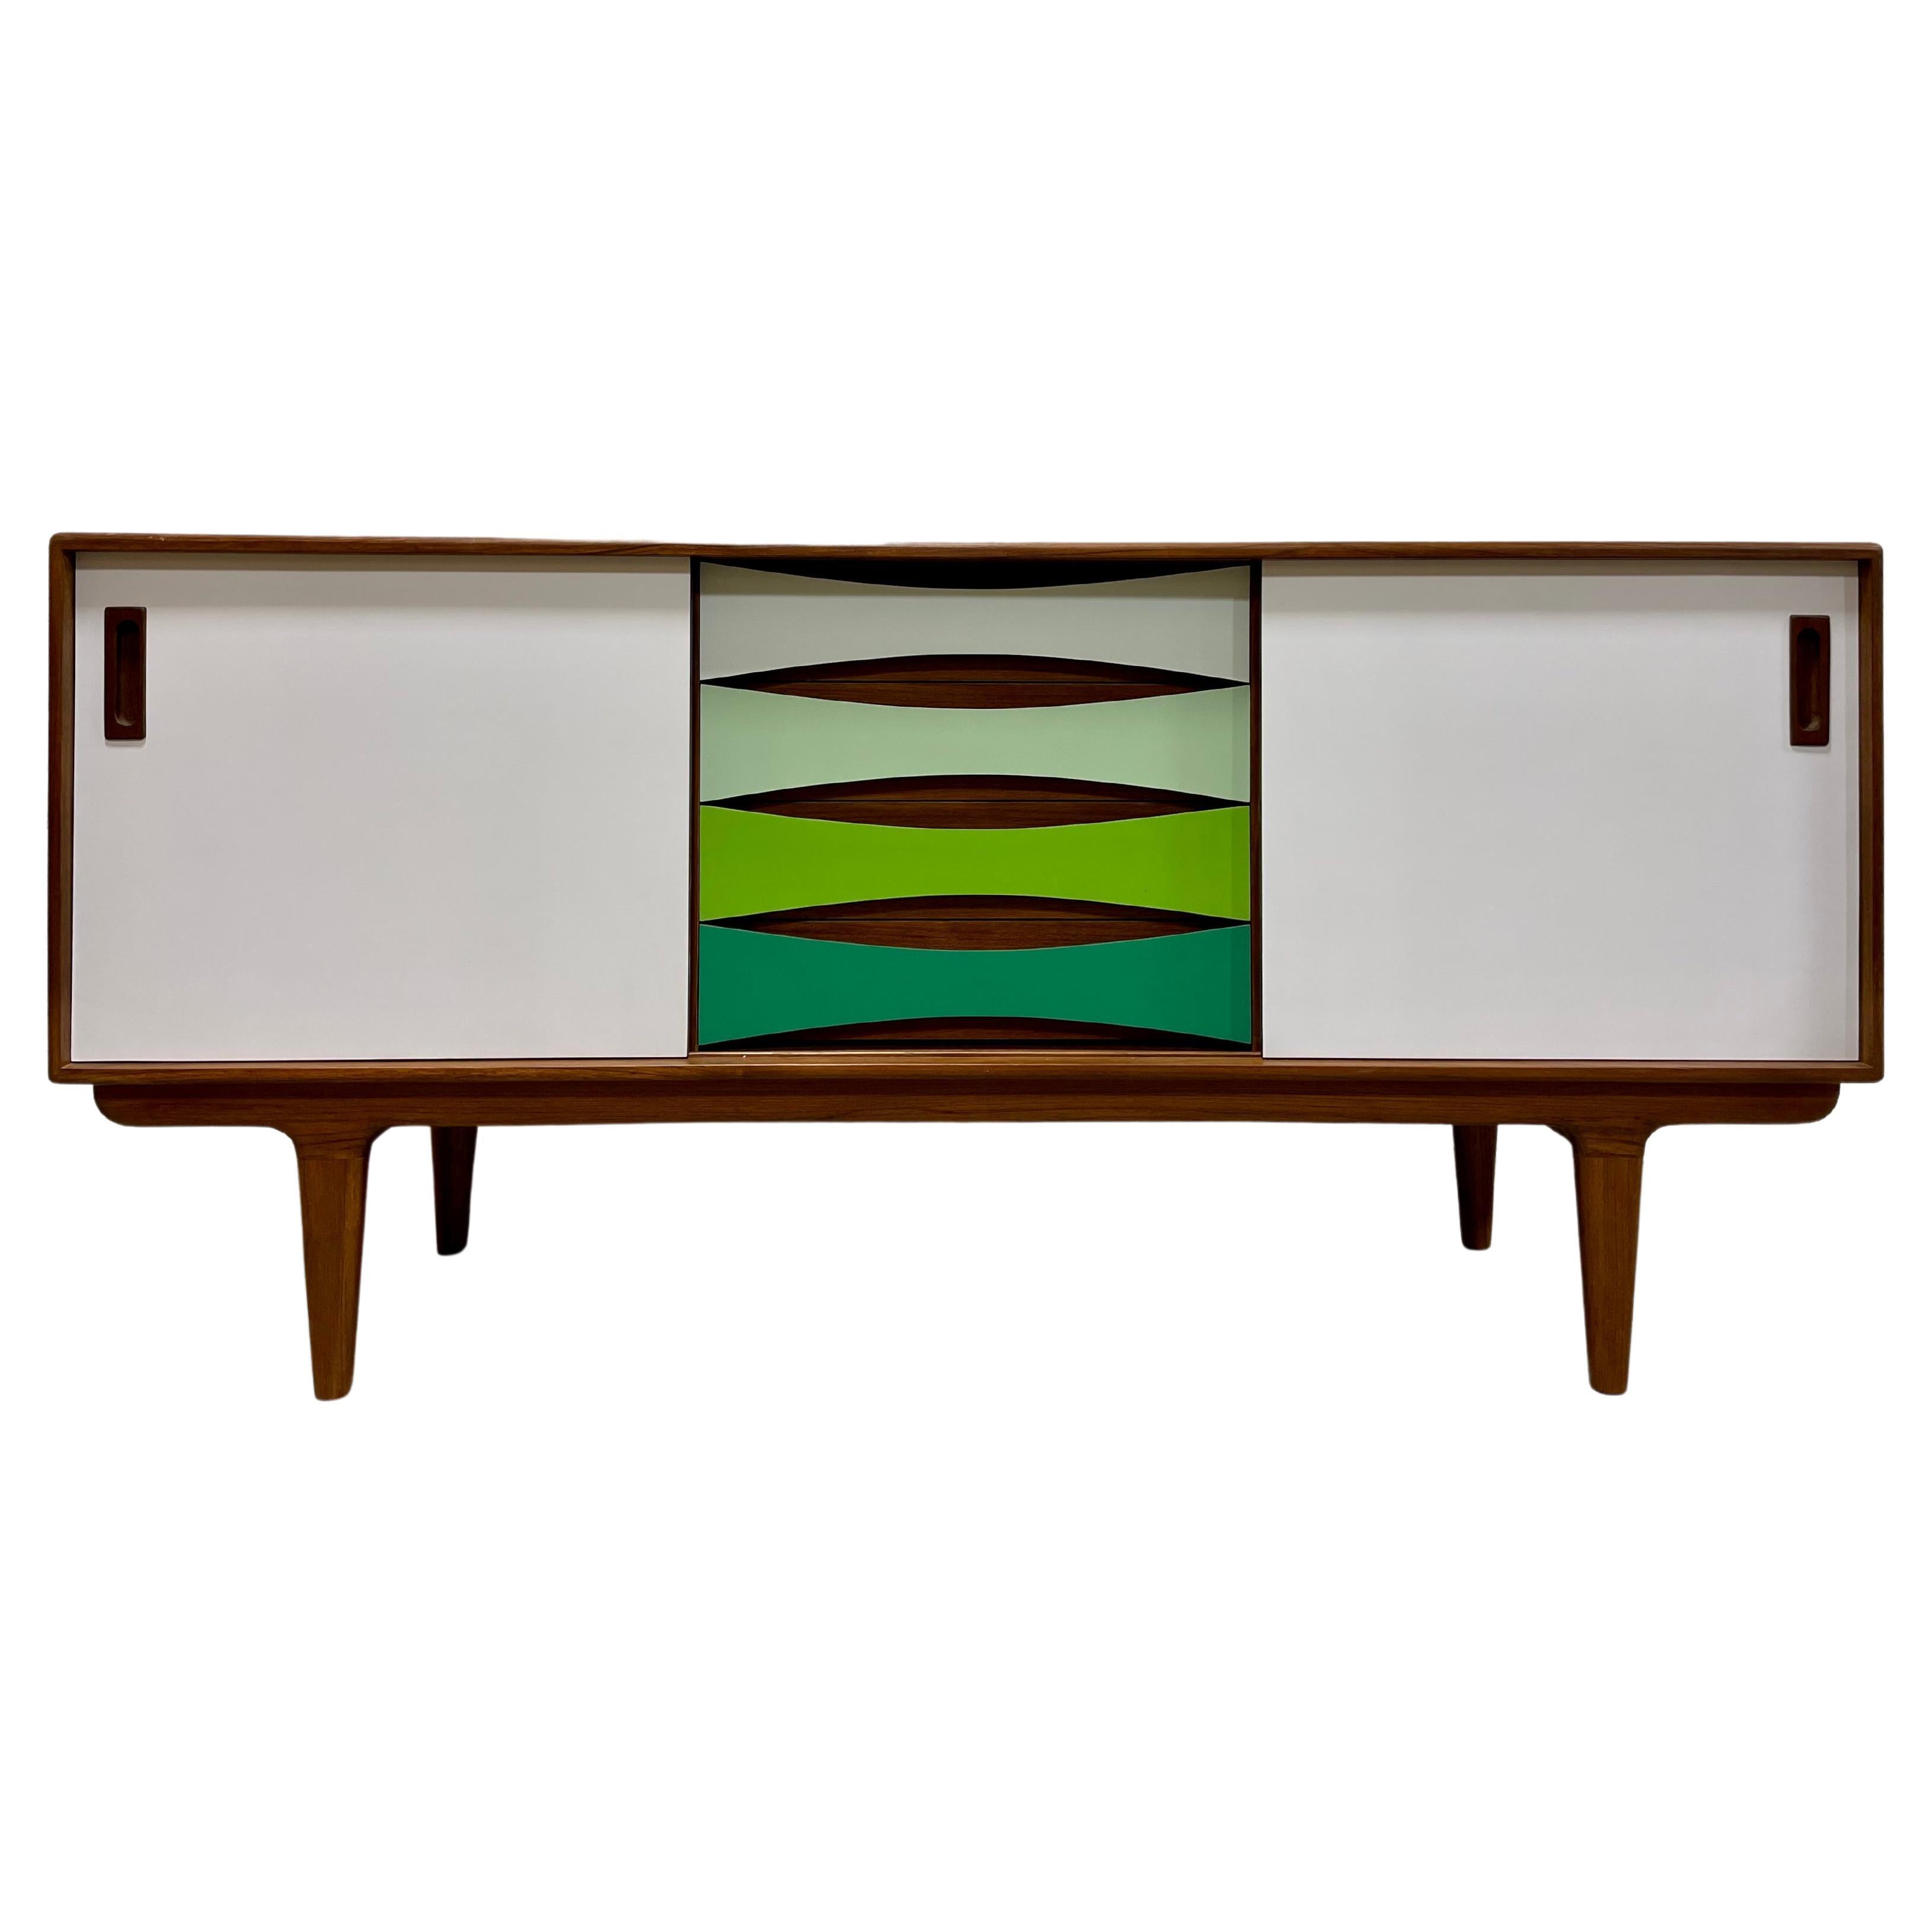 Mid-Century Modern Shades of Green Credenza / Sideboard / Media Stand